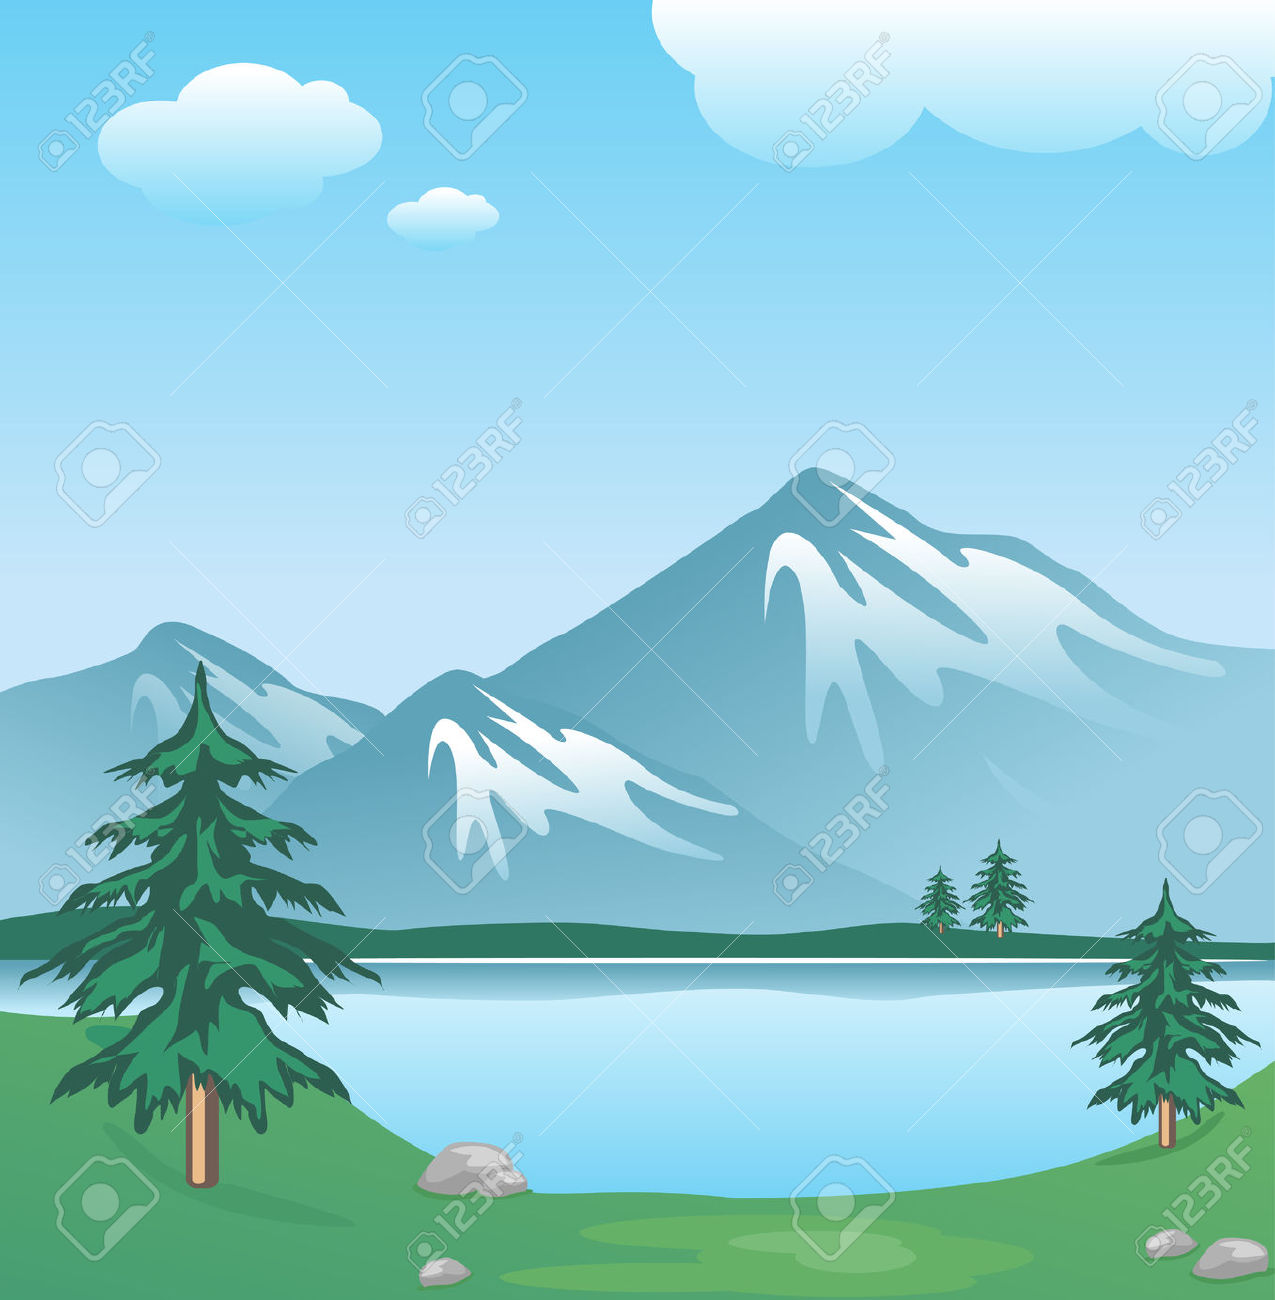 Lake clipart black and white free images